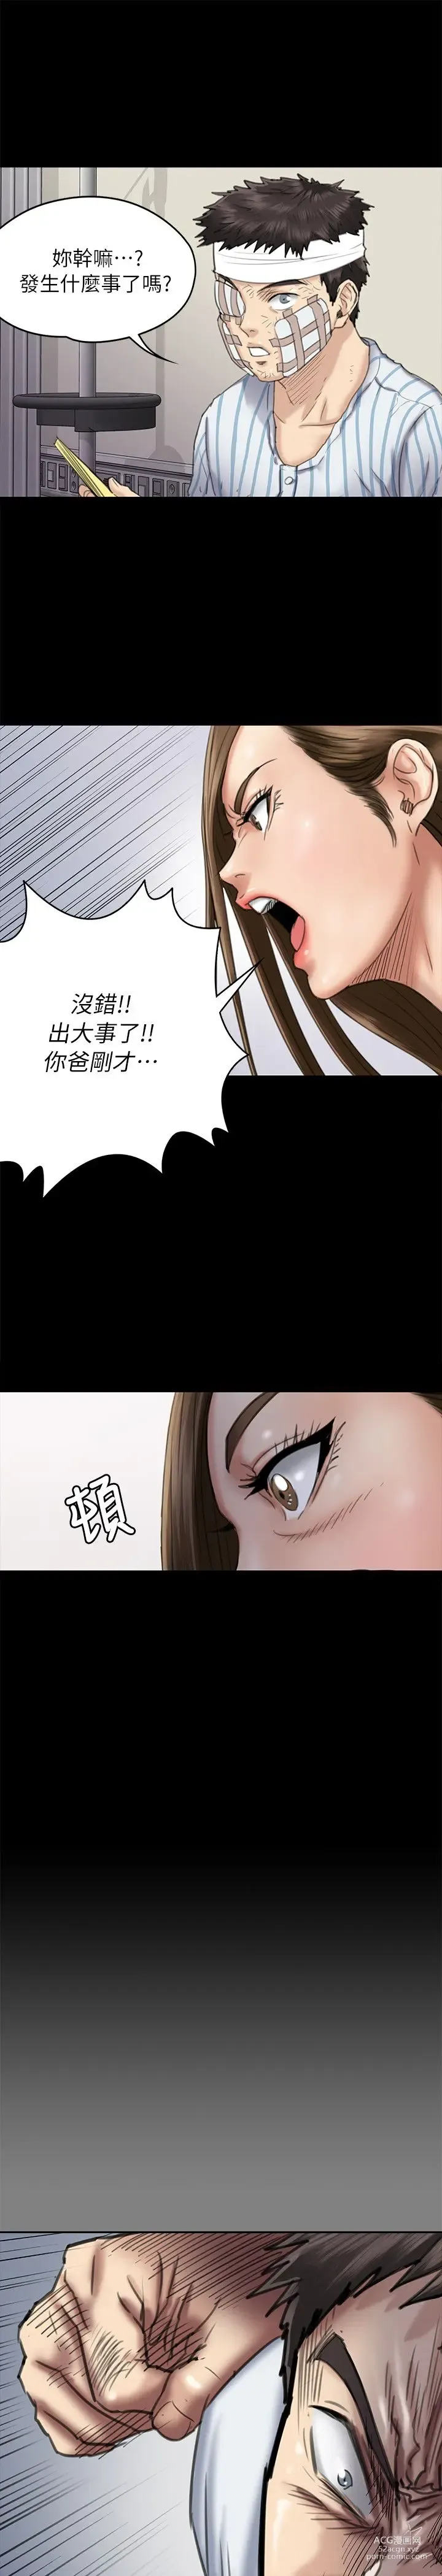 Page 27 of manga 傀儡 Queen Bee 51-100